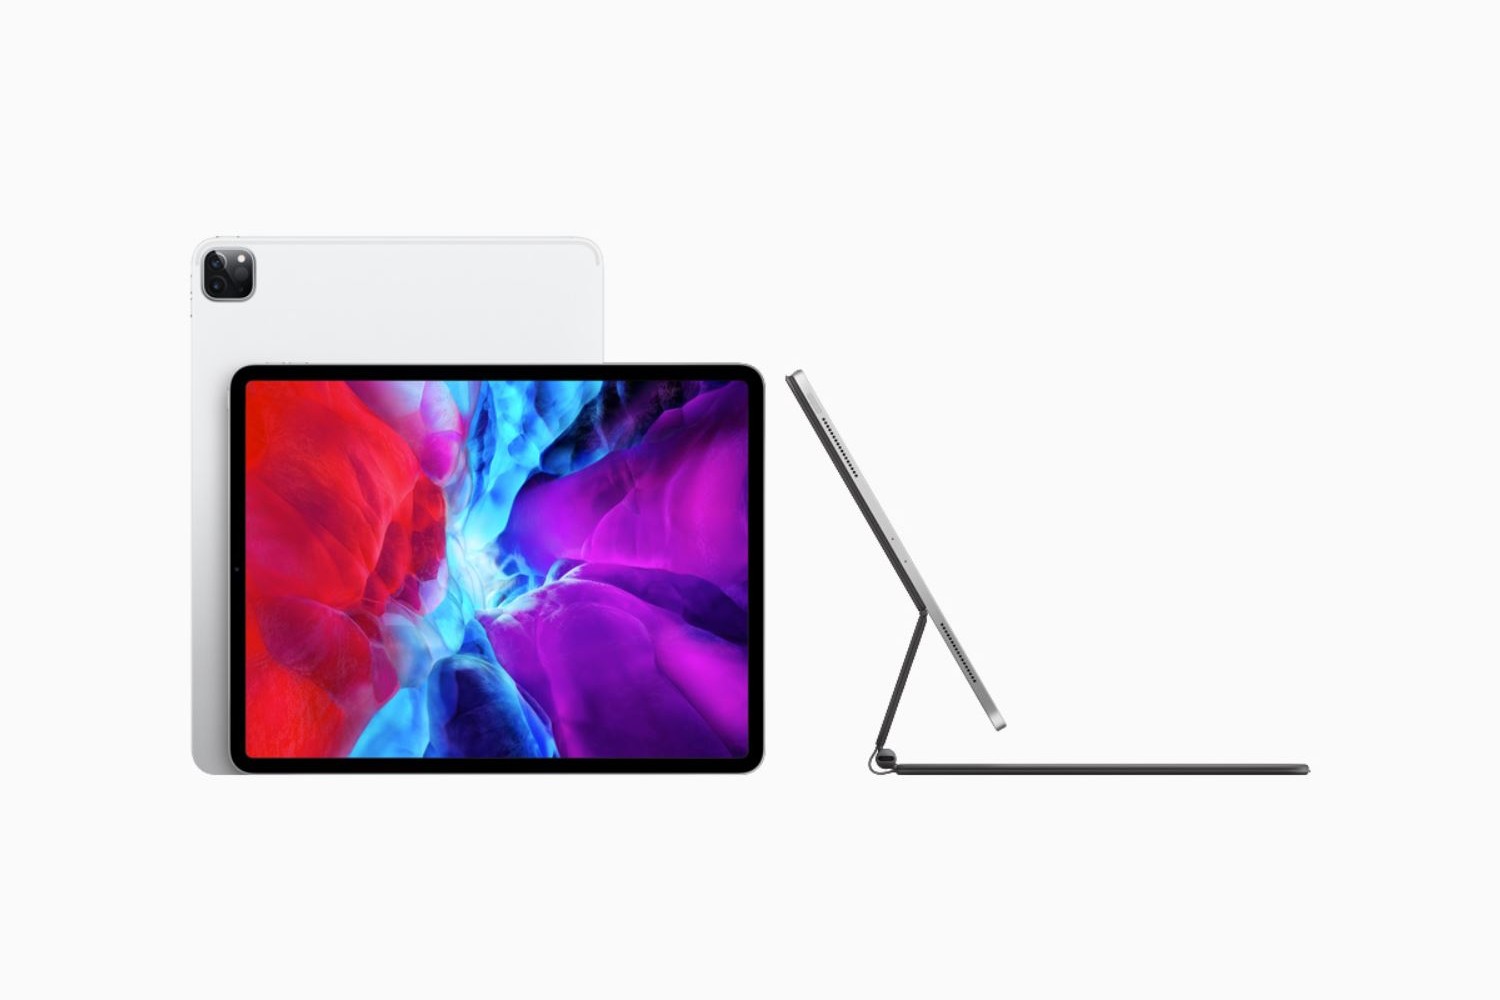 iPad Pro (2021) vs. MacBook Air M1: Which Is Right for You